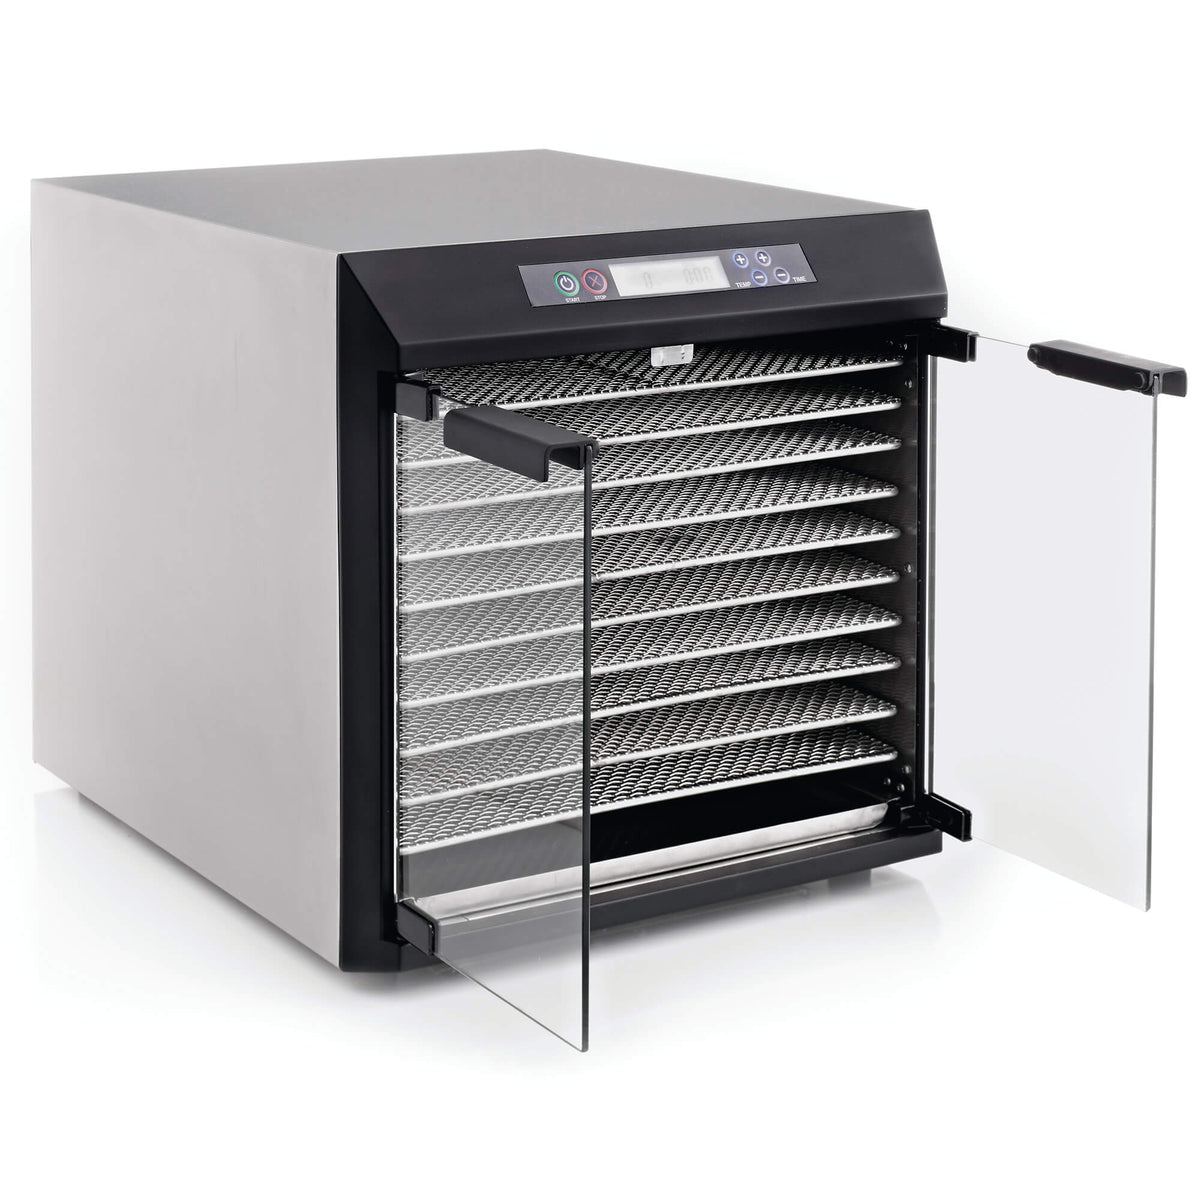 Excalibur EXC10EL 10 tray stainless steel digital dehydrator with glass armoured doors open and trays in.